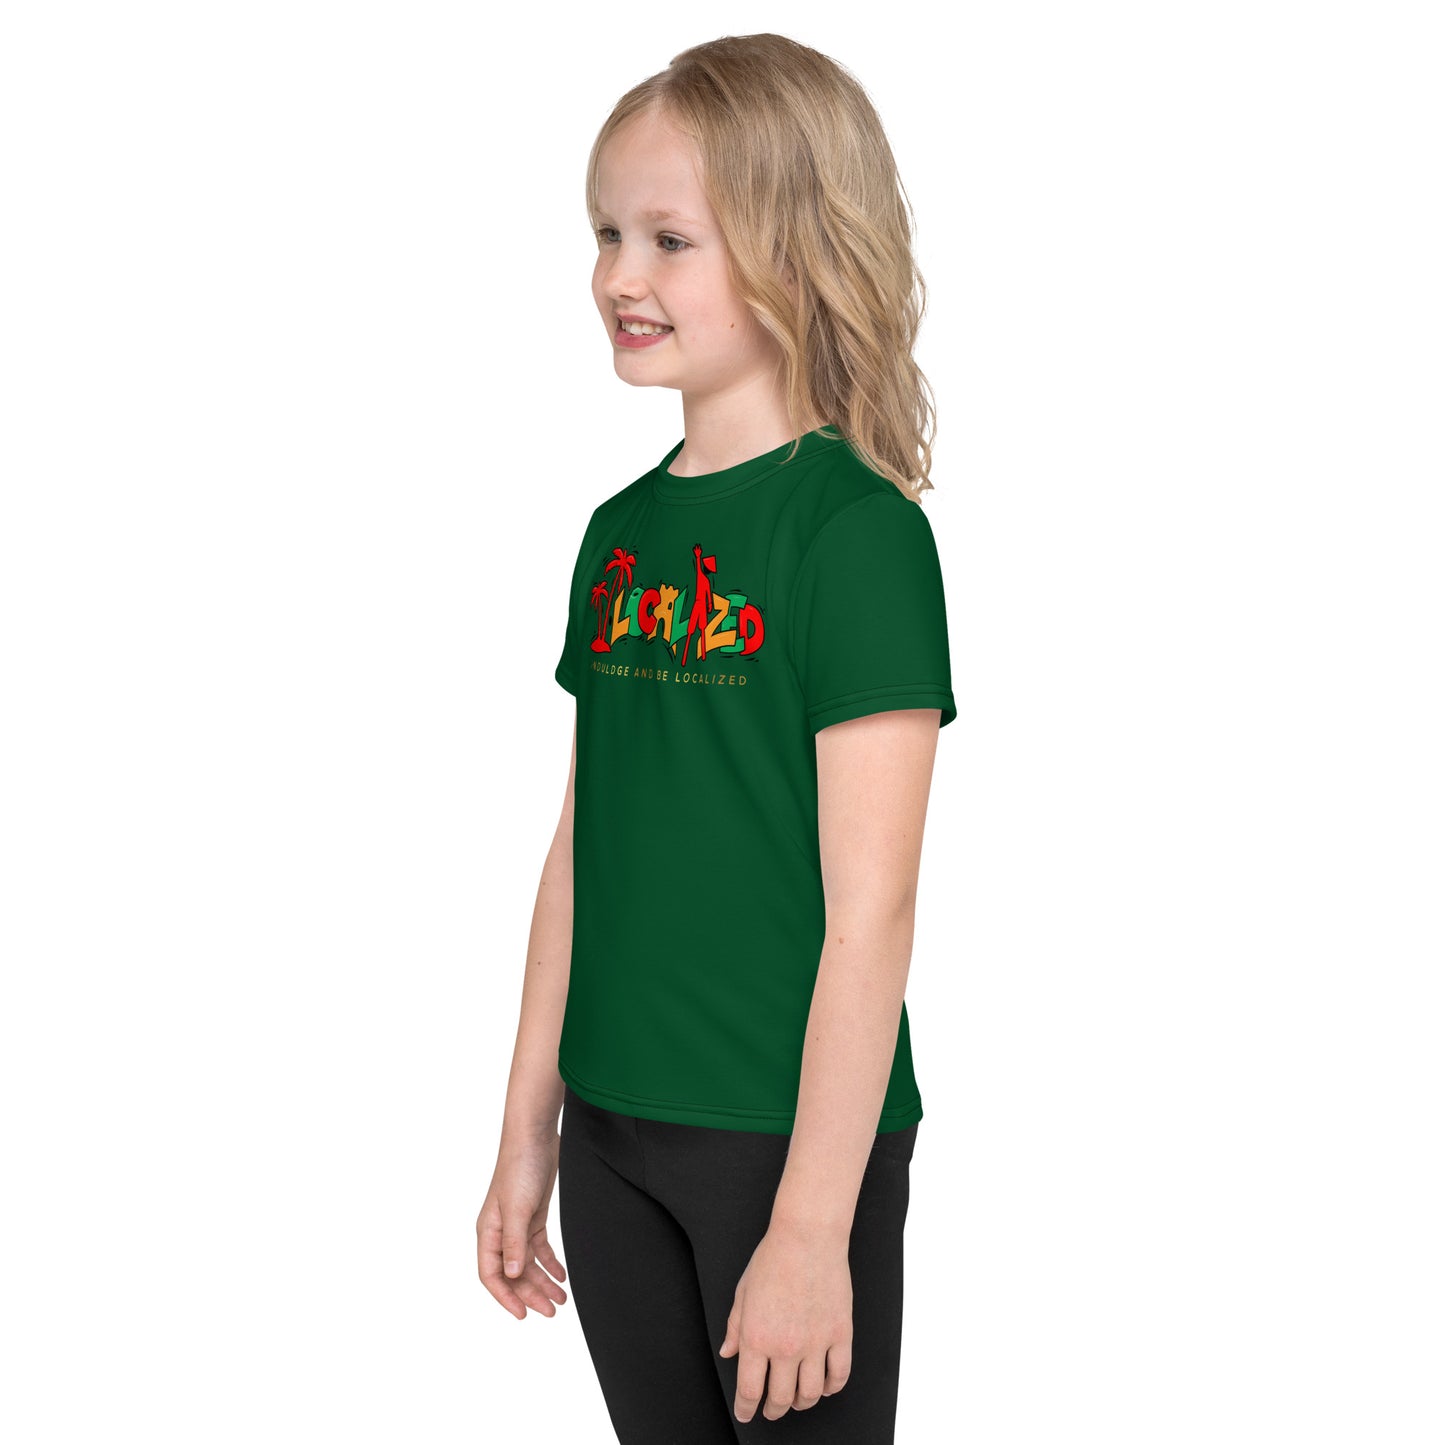 Dark Green V.Localized (Ice/Gold/Green) Kids Dry-Fit t-shirt